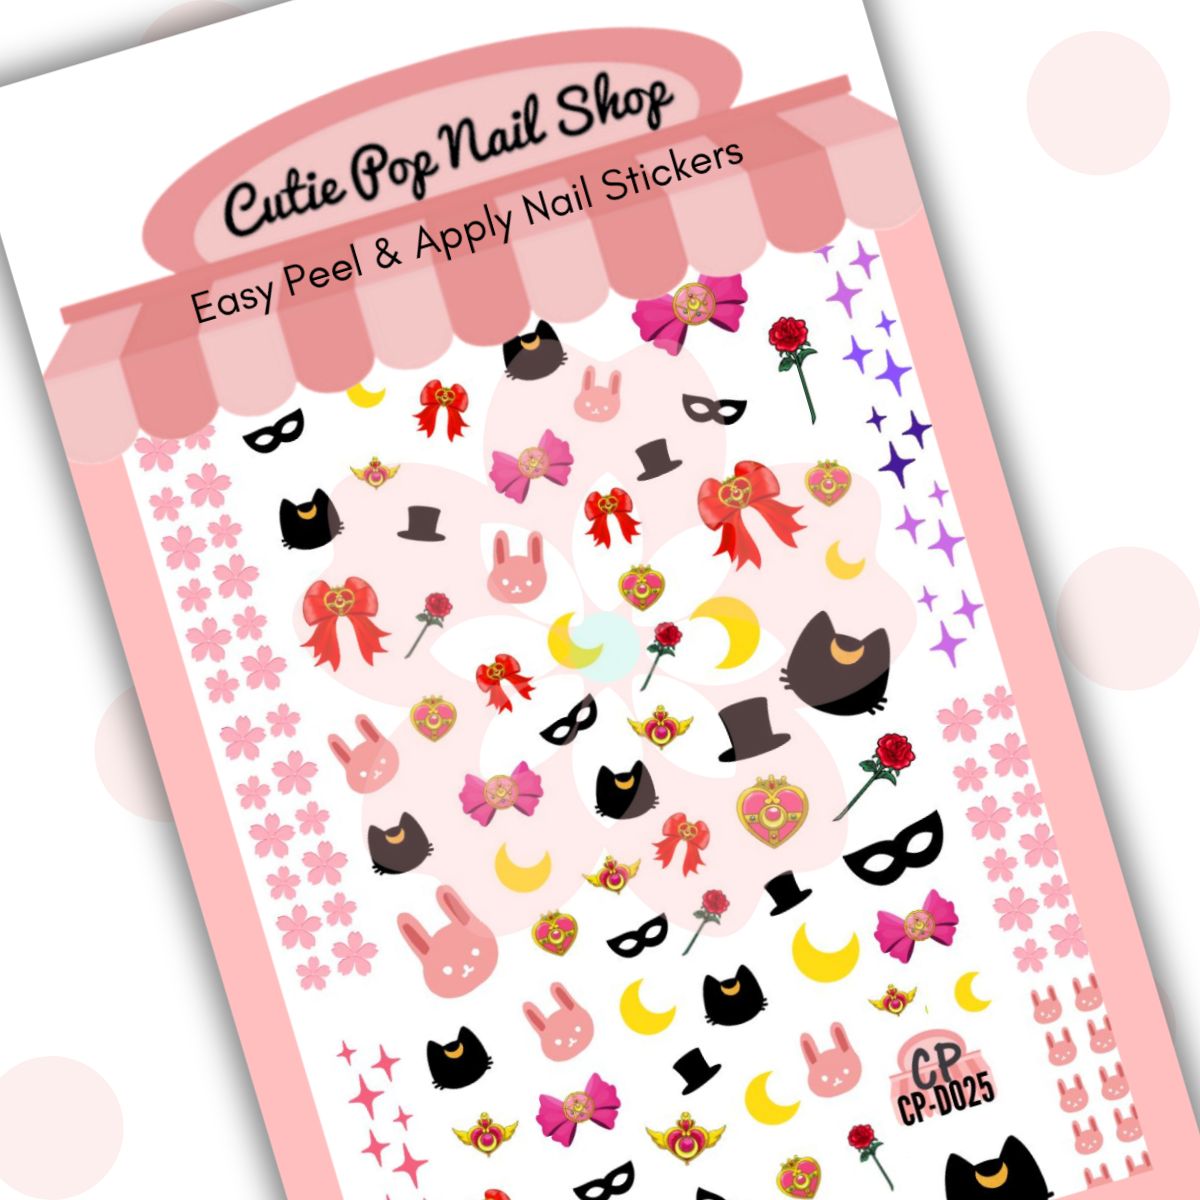 This image showcases Cutie Pop Nail Shop’s Luna nail decals against a white background with a Cutie Pop Nail Shop logo and watermark. These mystery-laden nail decal designs include a black mask, a top hat, a crescent moon, a red and pink bow, a pink-and-gold heart, a rose, a pink rabbit head, and a silhouetted black cat head with a crescent moon on its forehead.